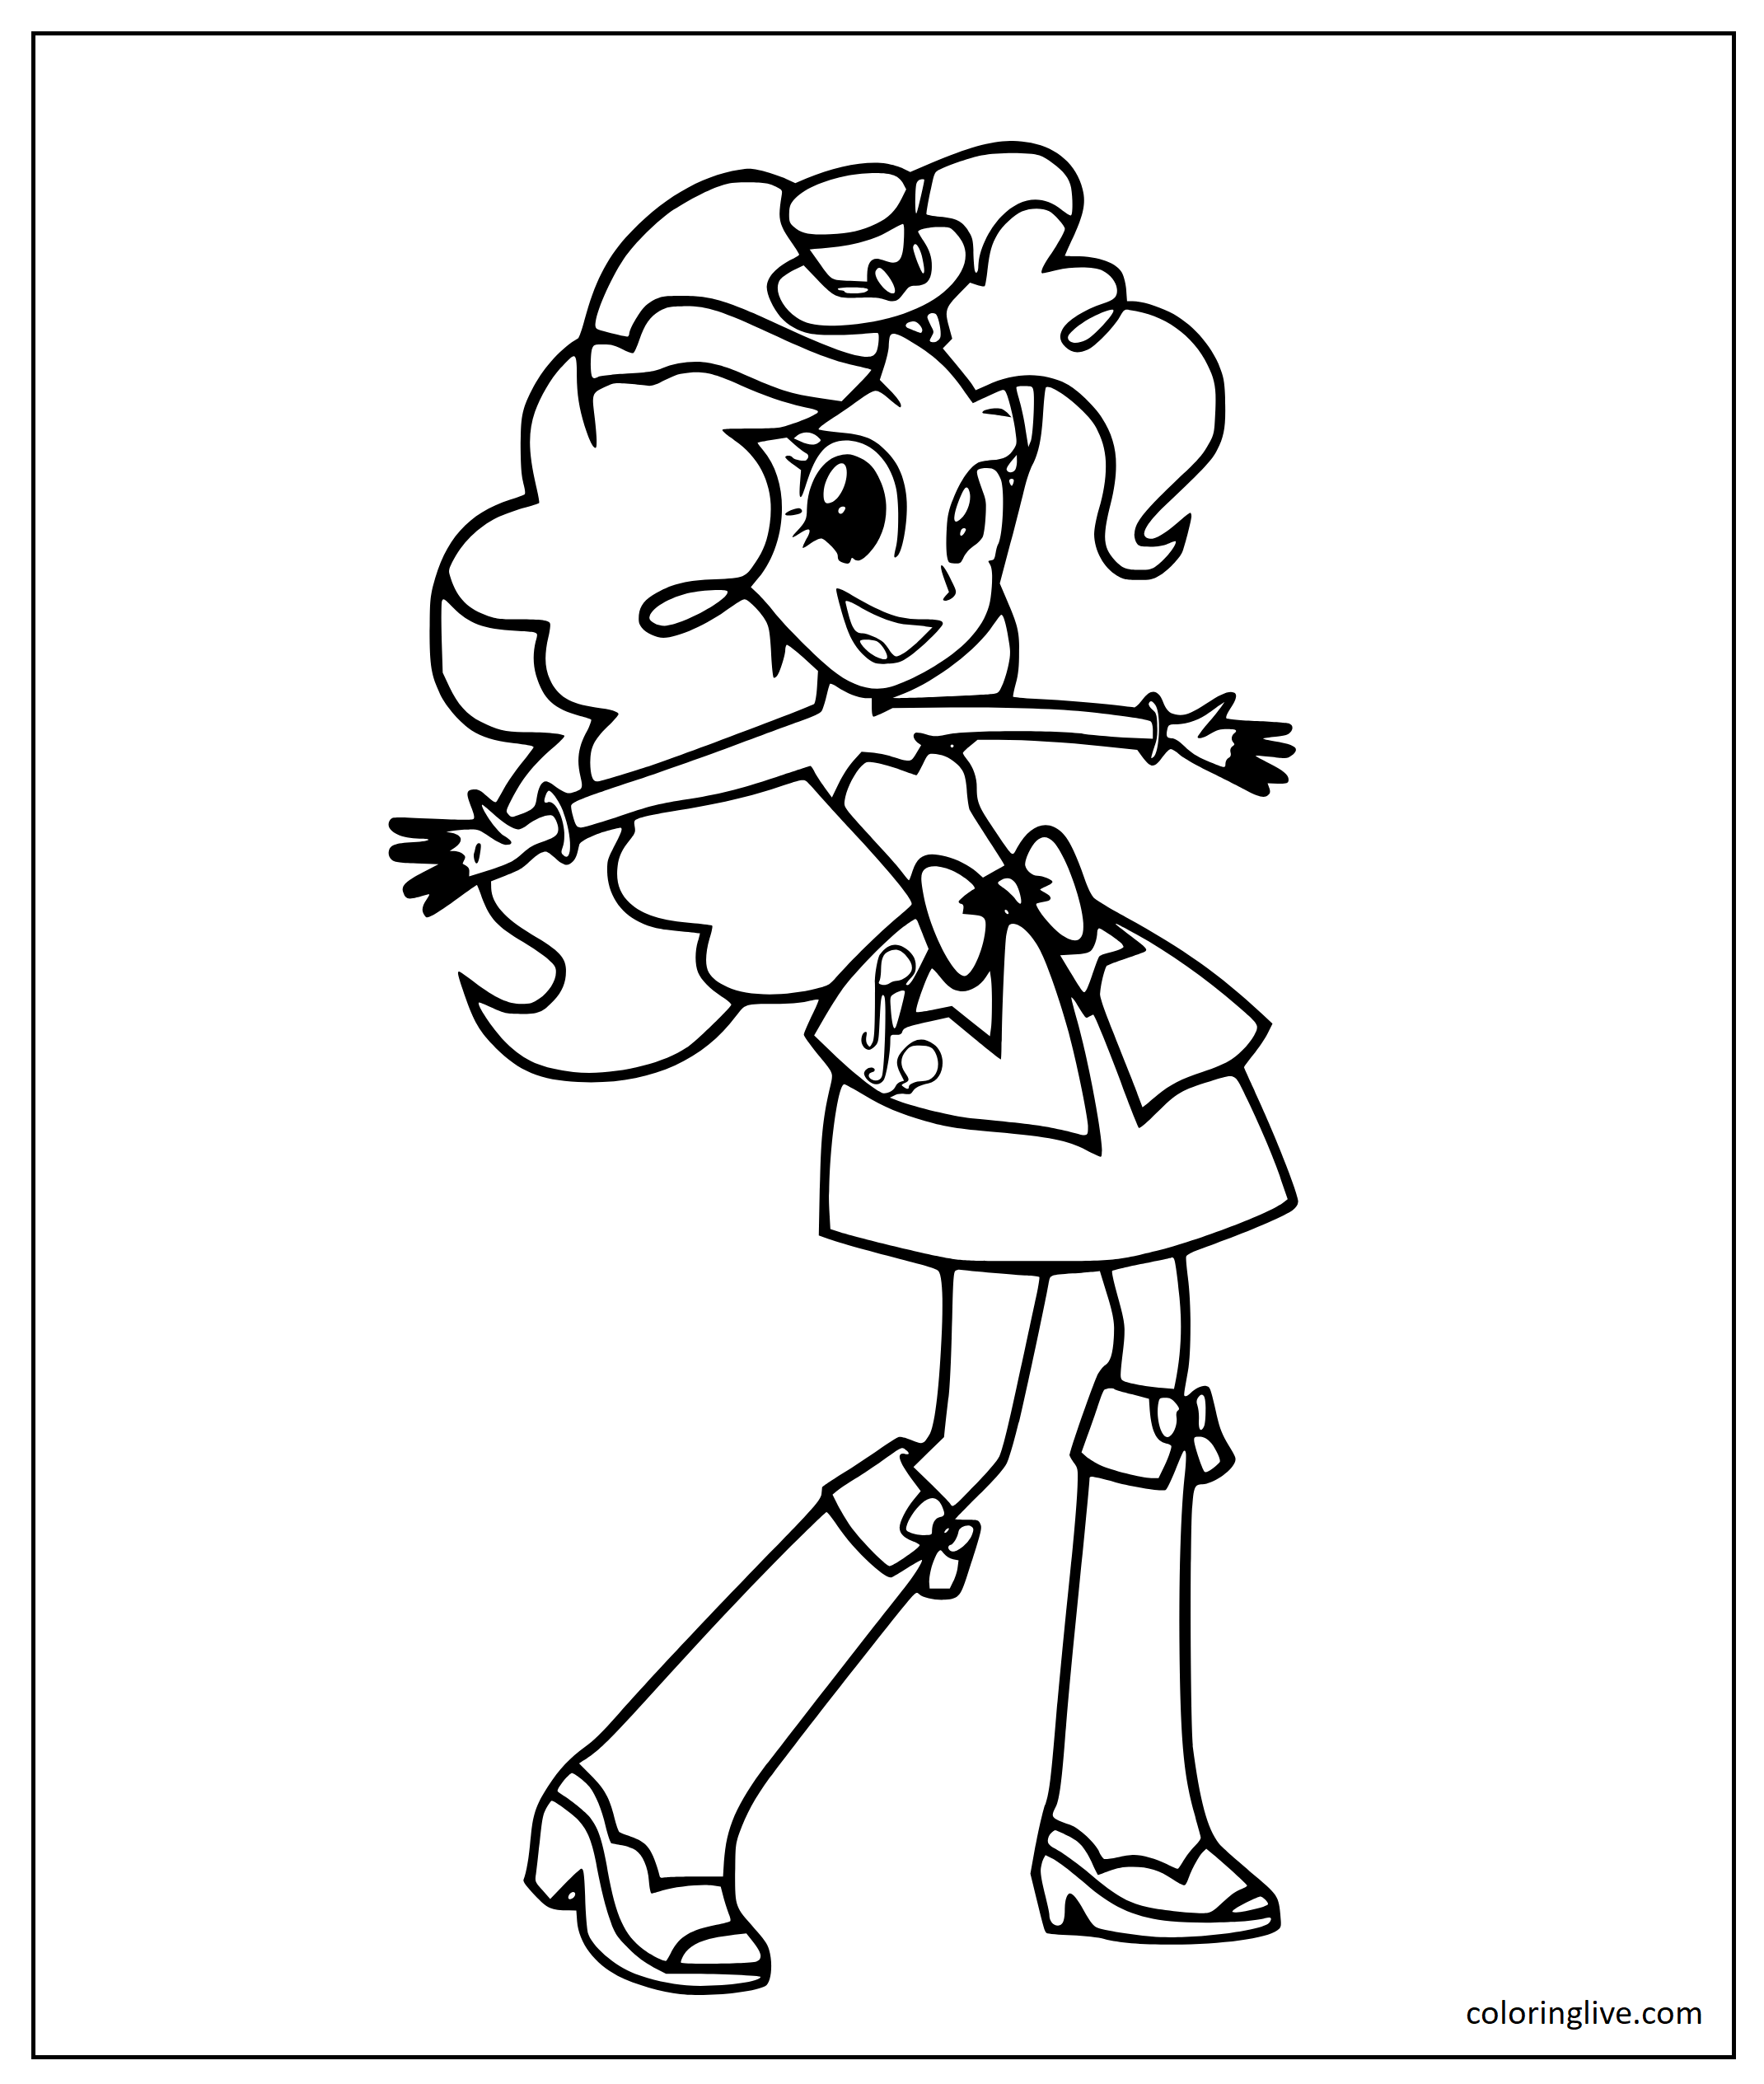 Printable Pinkie Pie Coloring Page for kids.